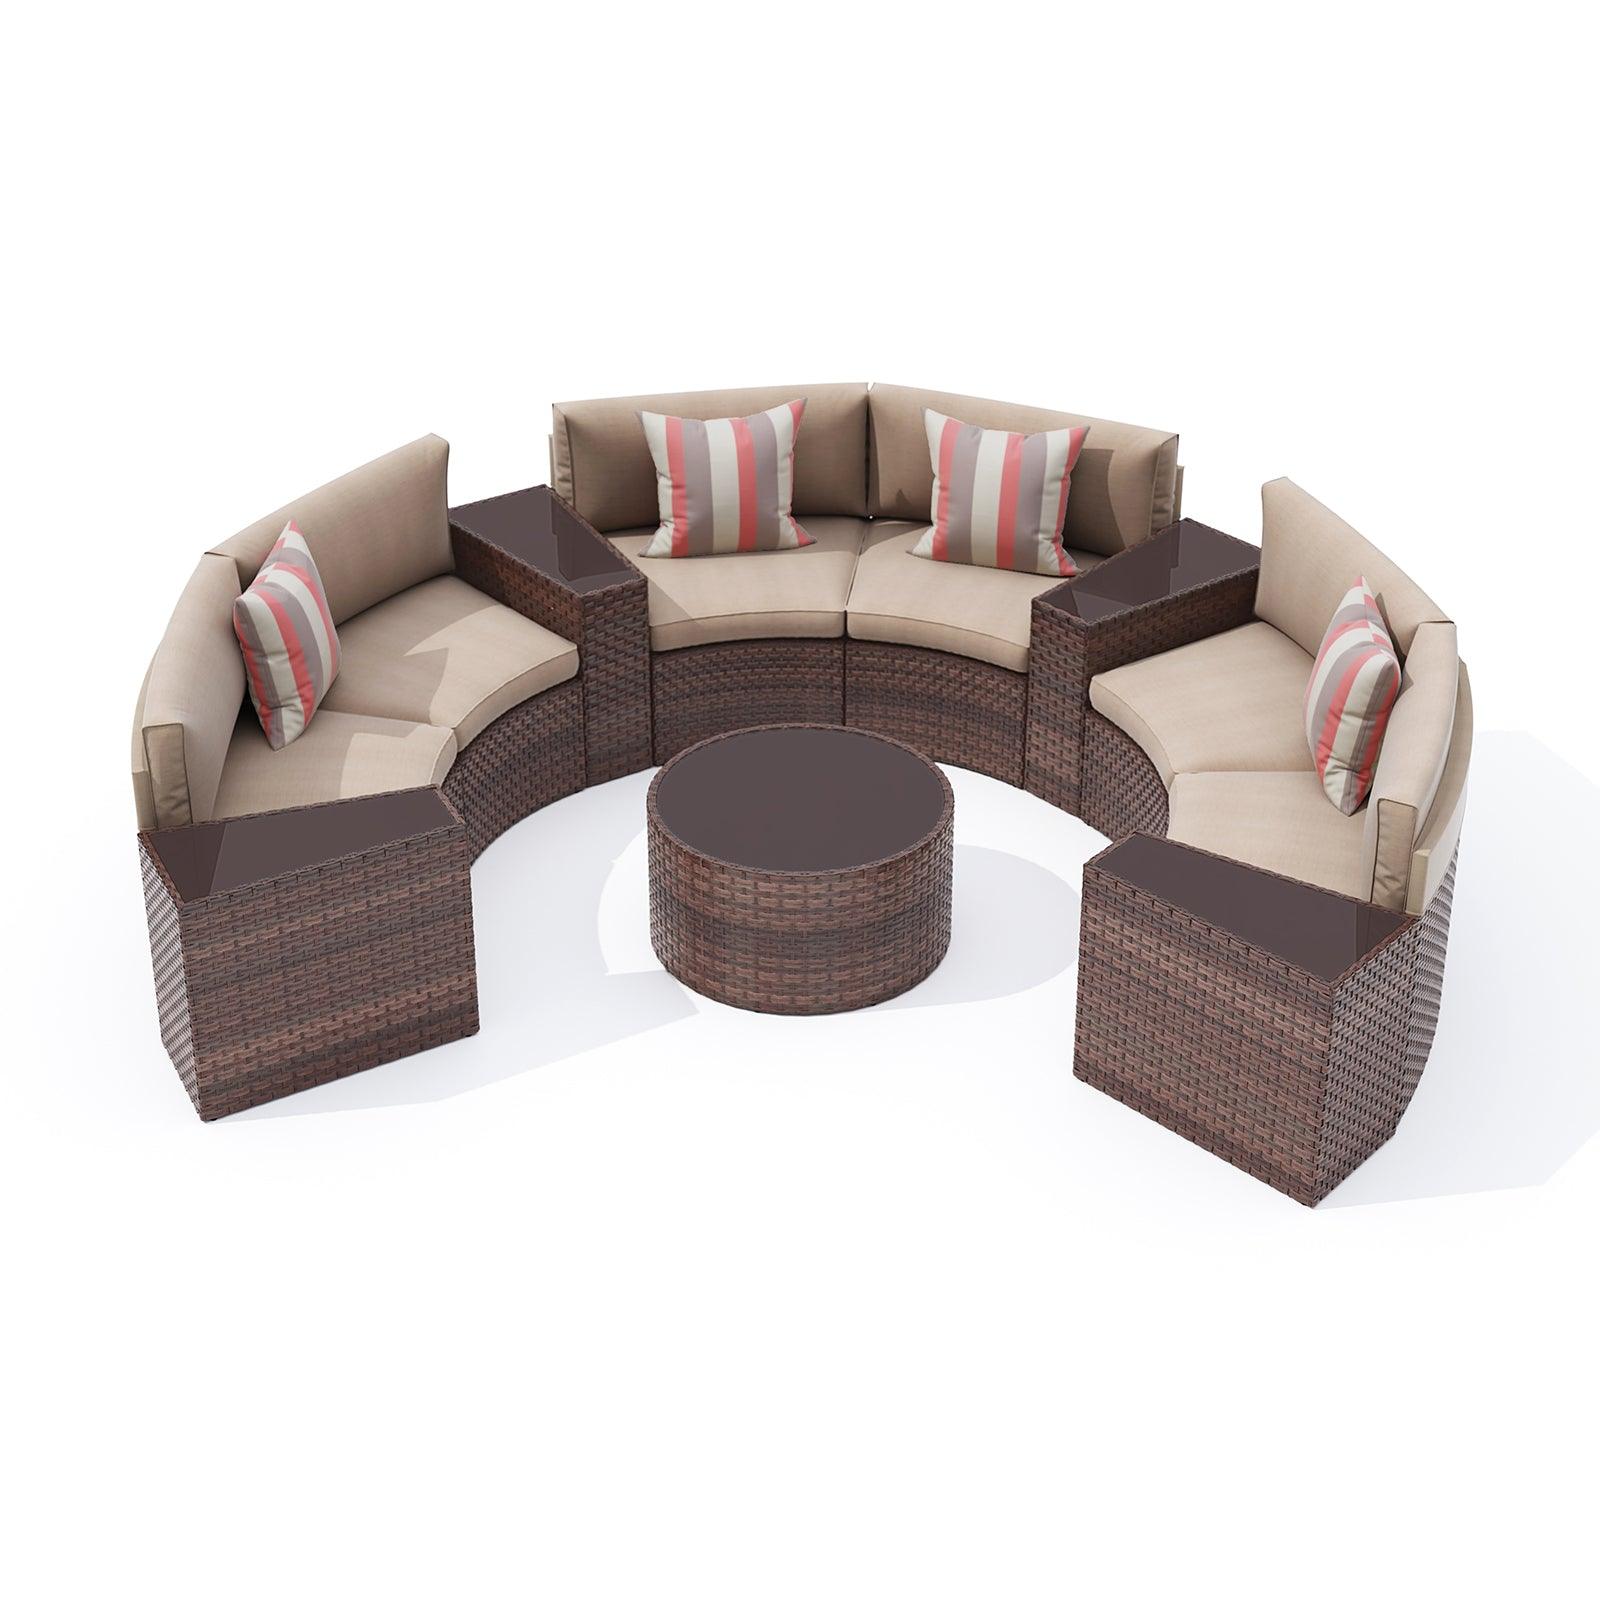 Halo 11-pc. Outdoor Half-Moon Sectional Set sale 